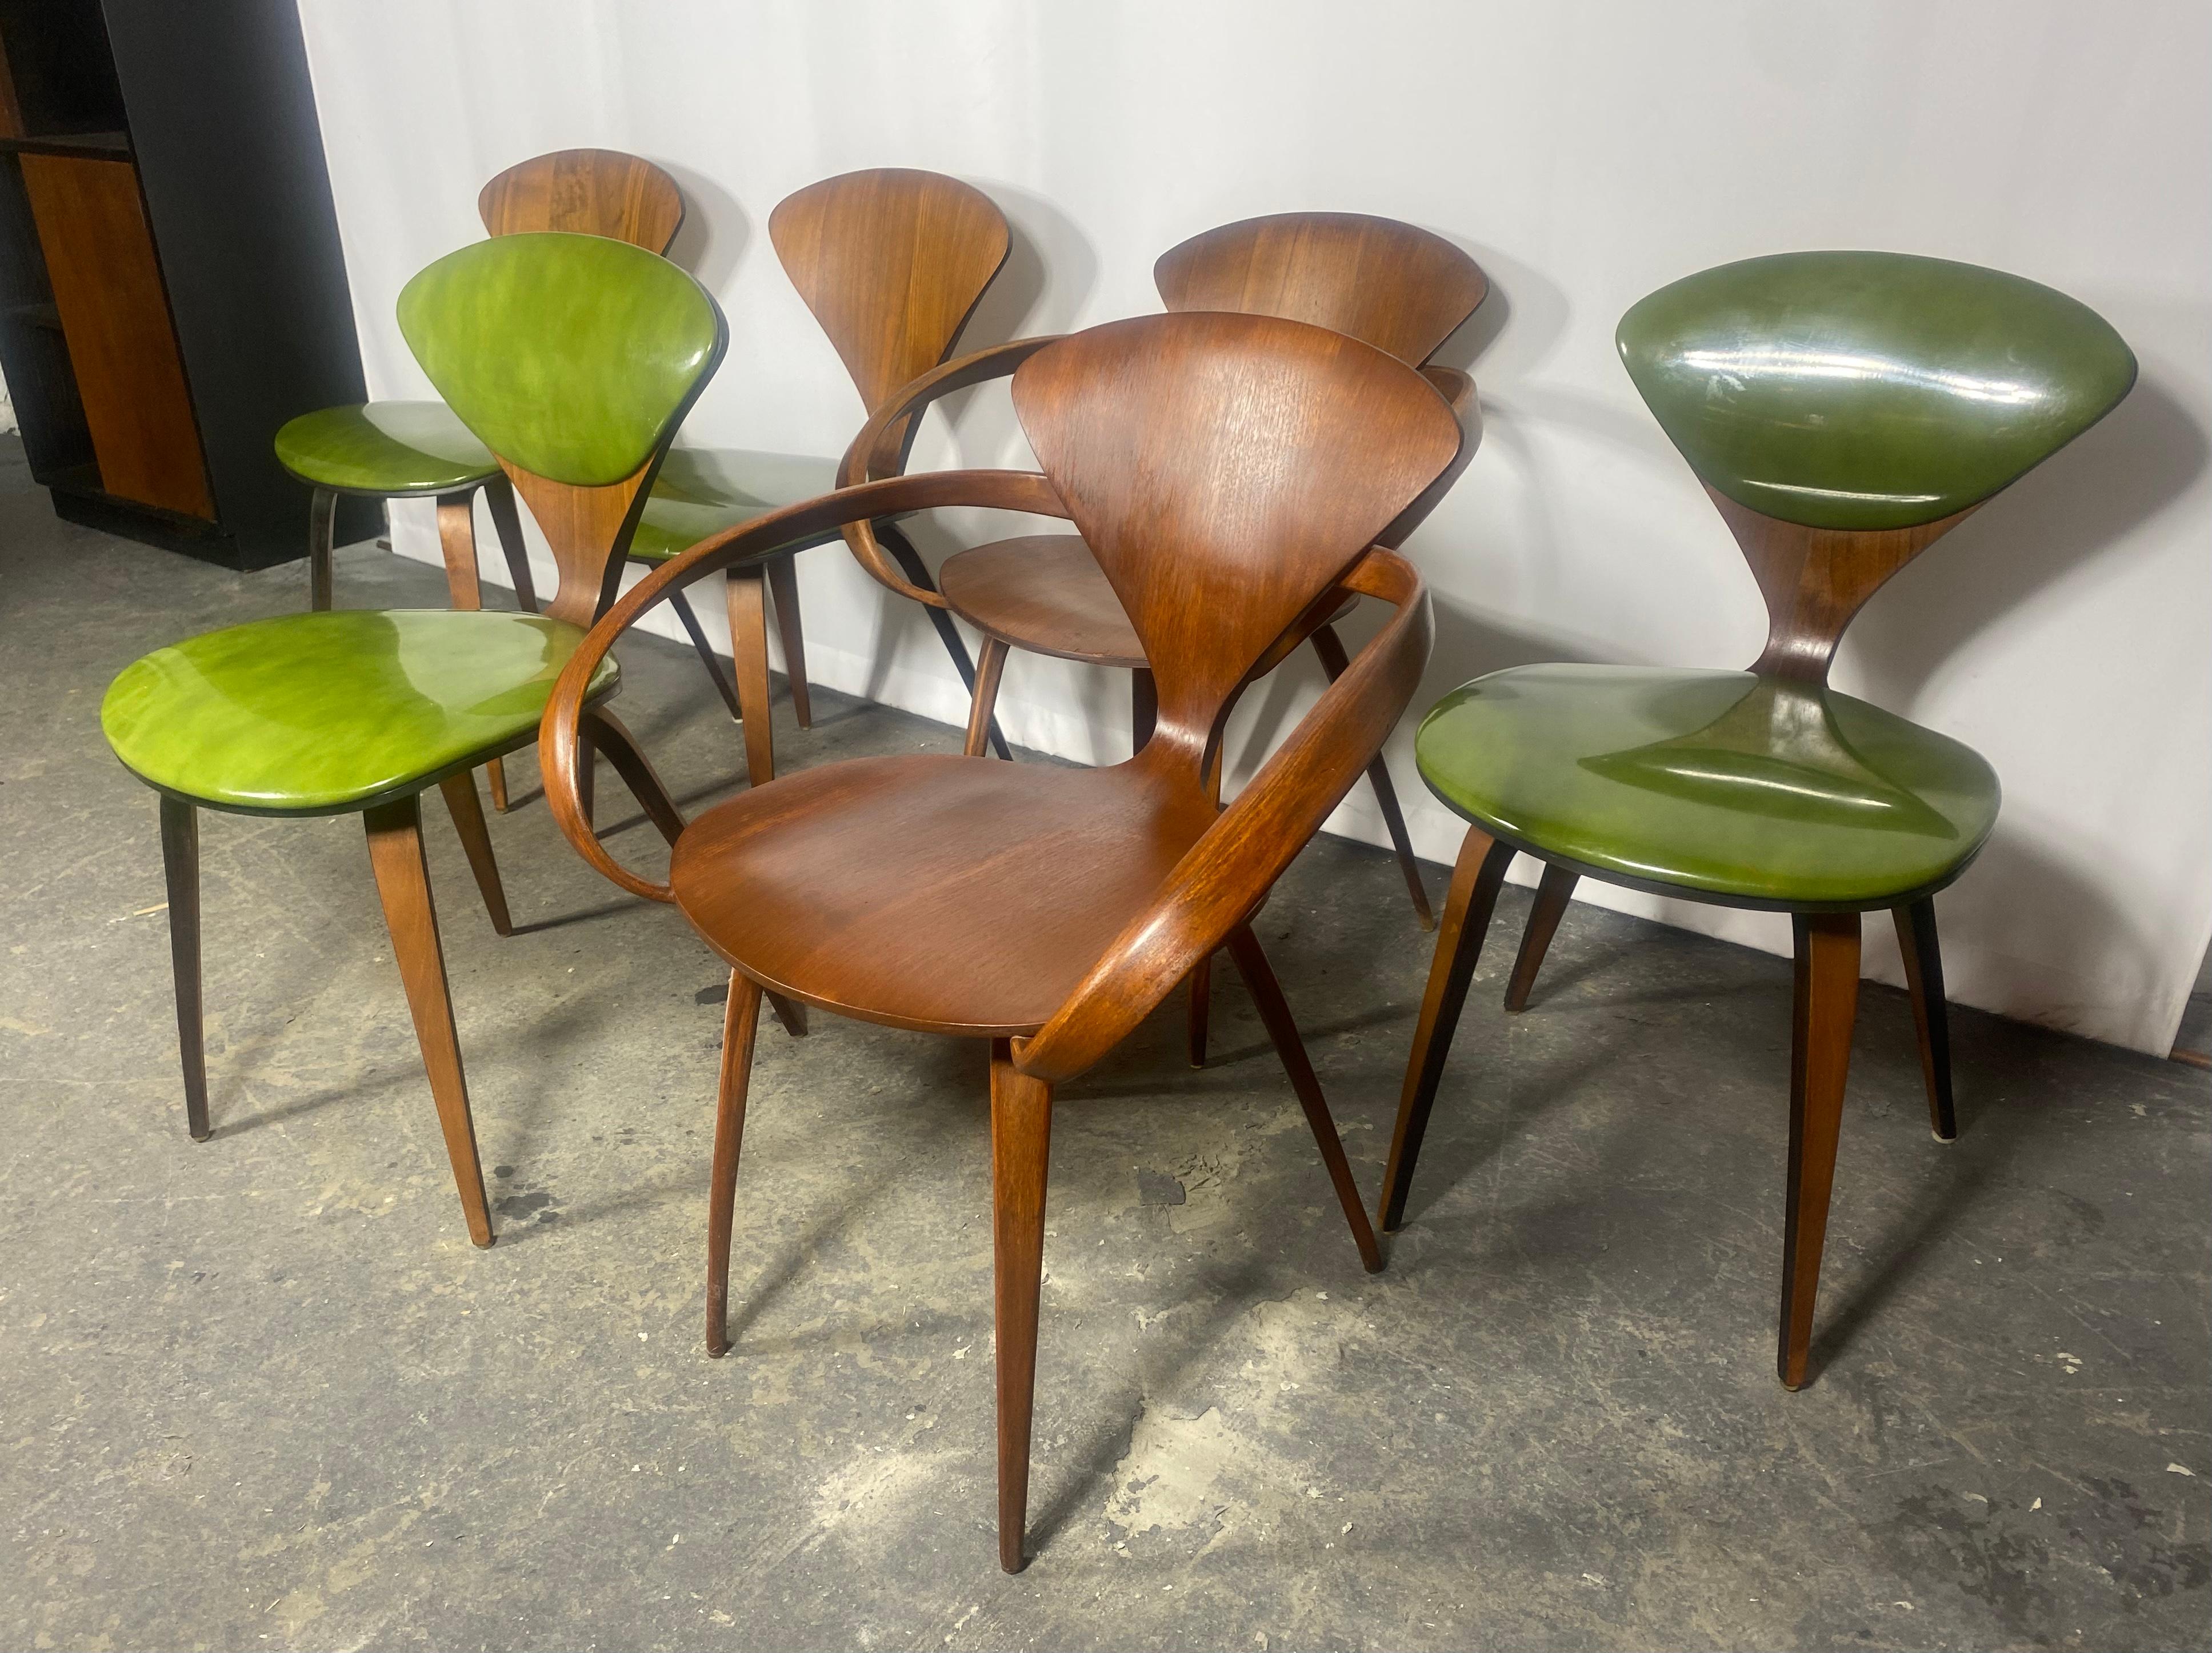 Set of 6 Norman Cherner Dining Chairs, Made by Plycraft, USA, 1963. 2 Arm Chairs In Good Condition For Sale In Buffalo, NY